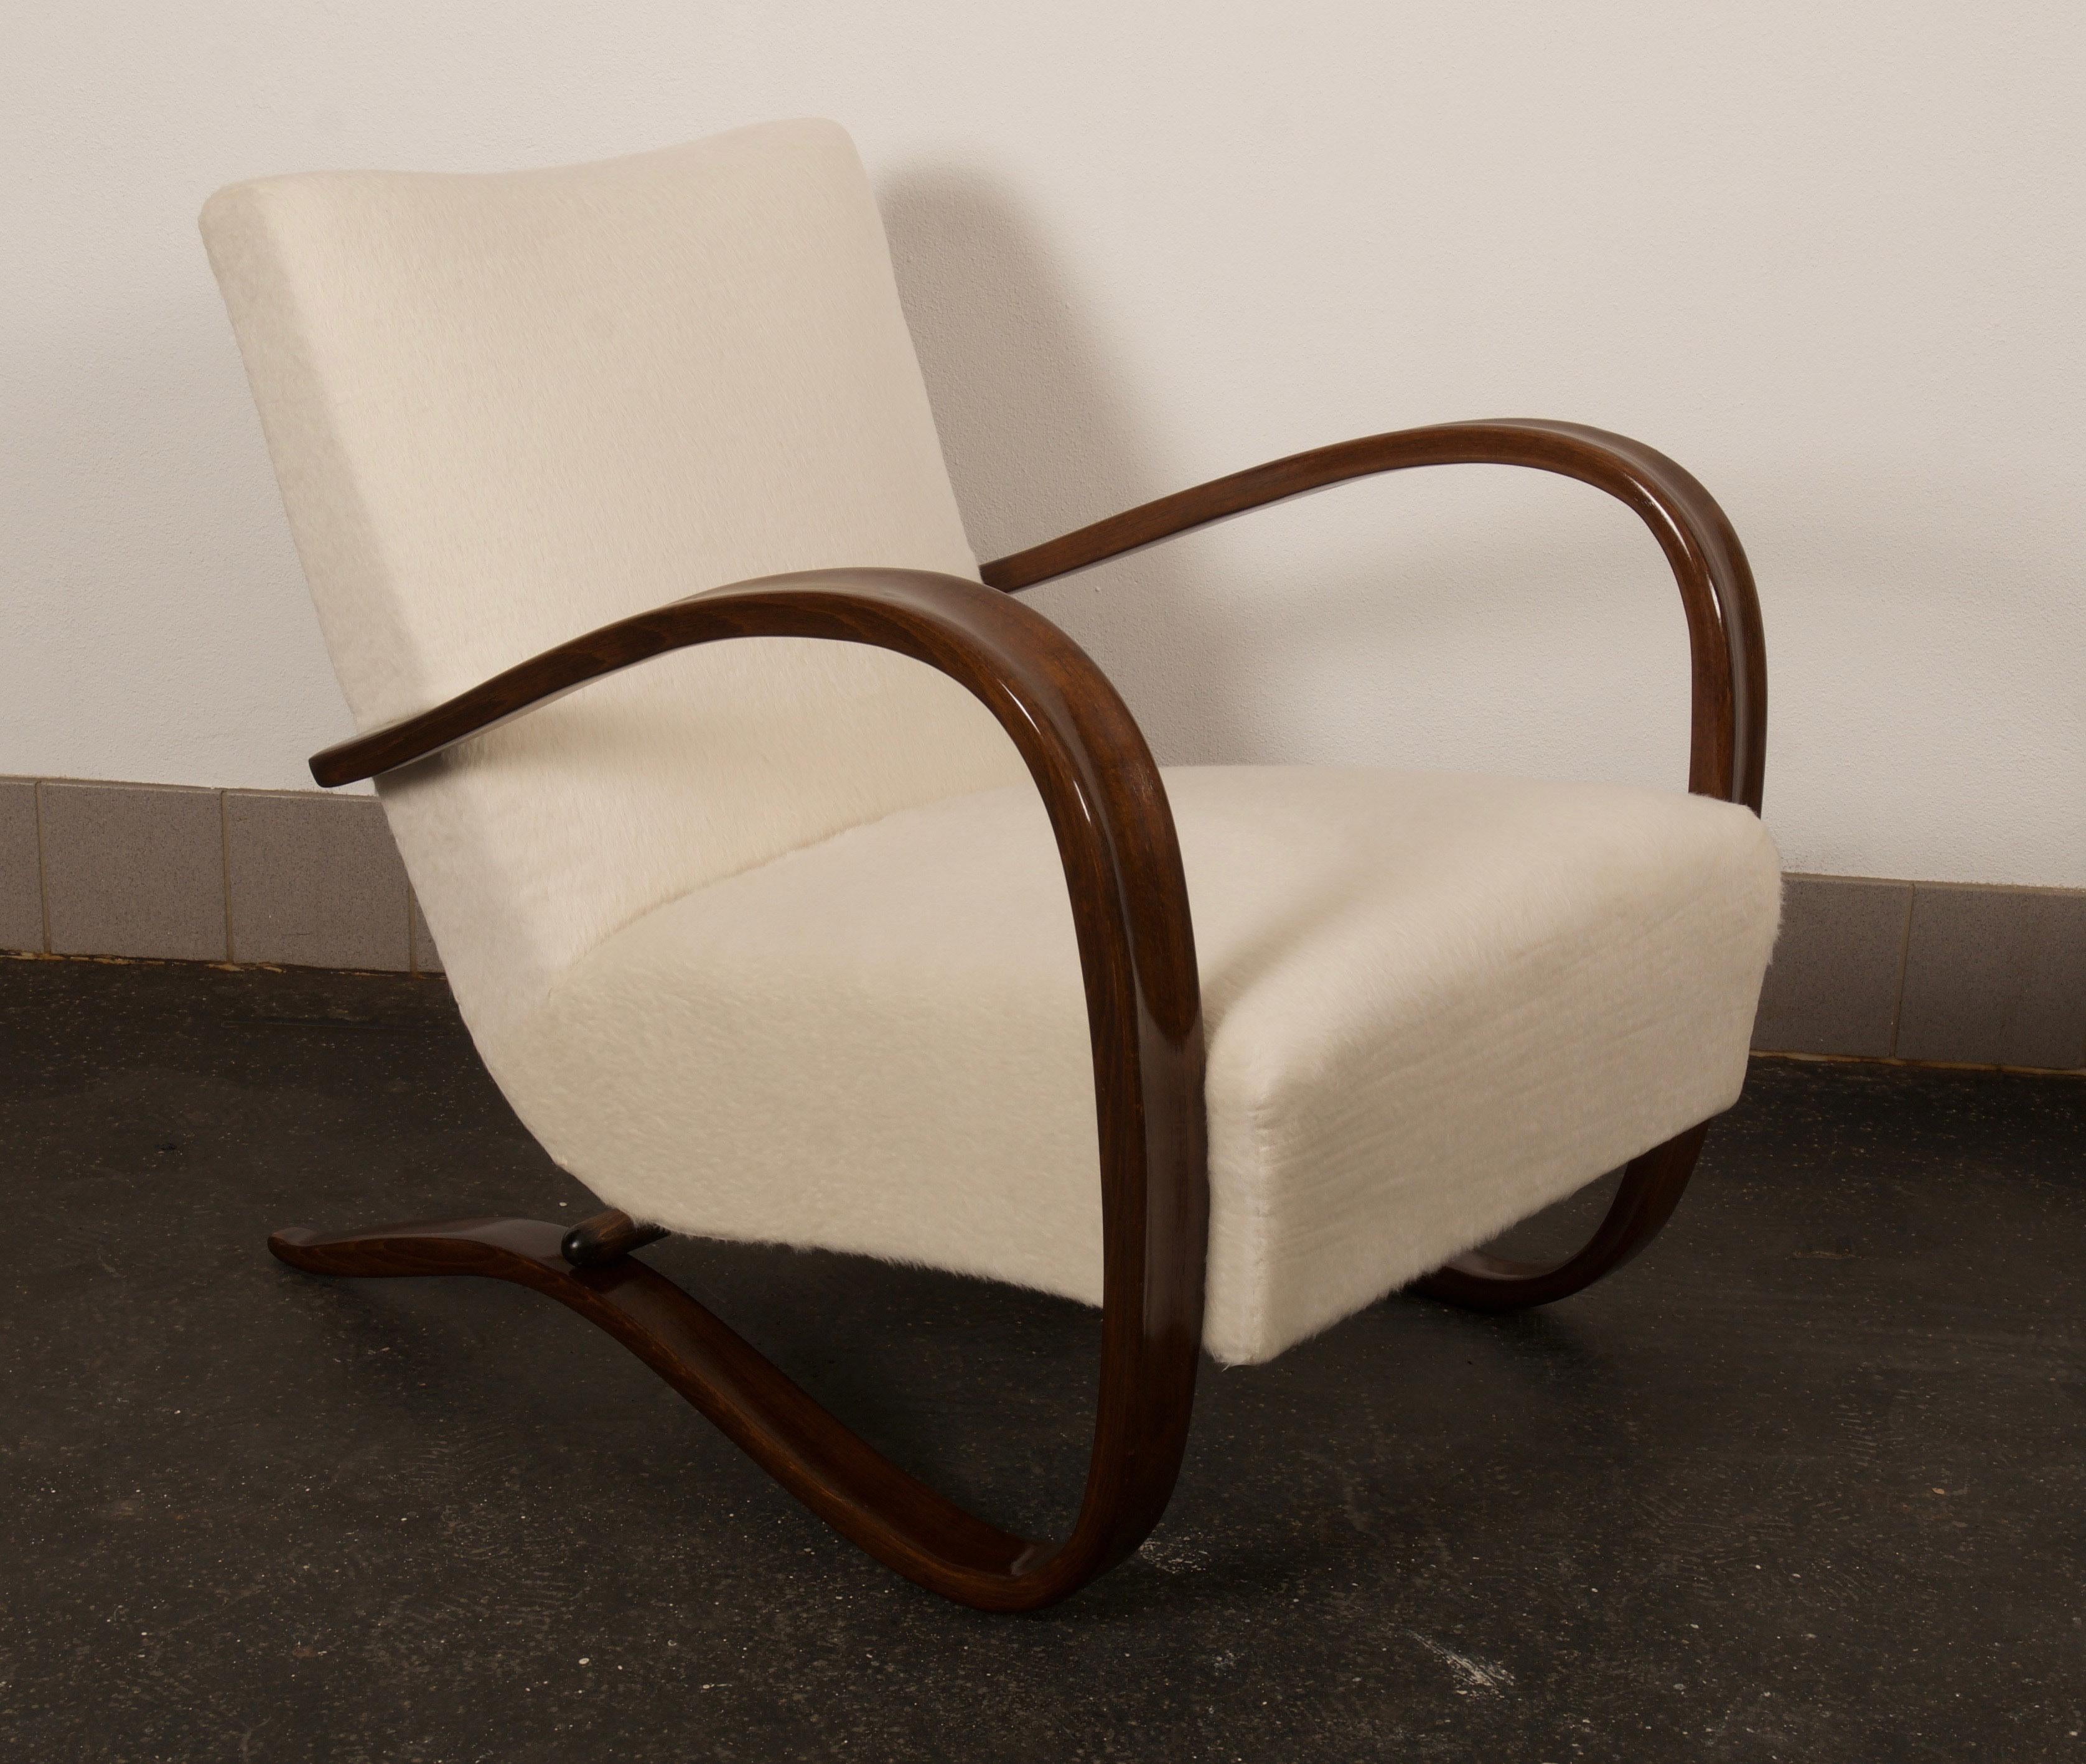 Beech bentwood armchair by Thonet from the 1930s.
Excellent restored with seat springs.
On request several available
Delivery time about 4-5 weeks.
Price per chair.